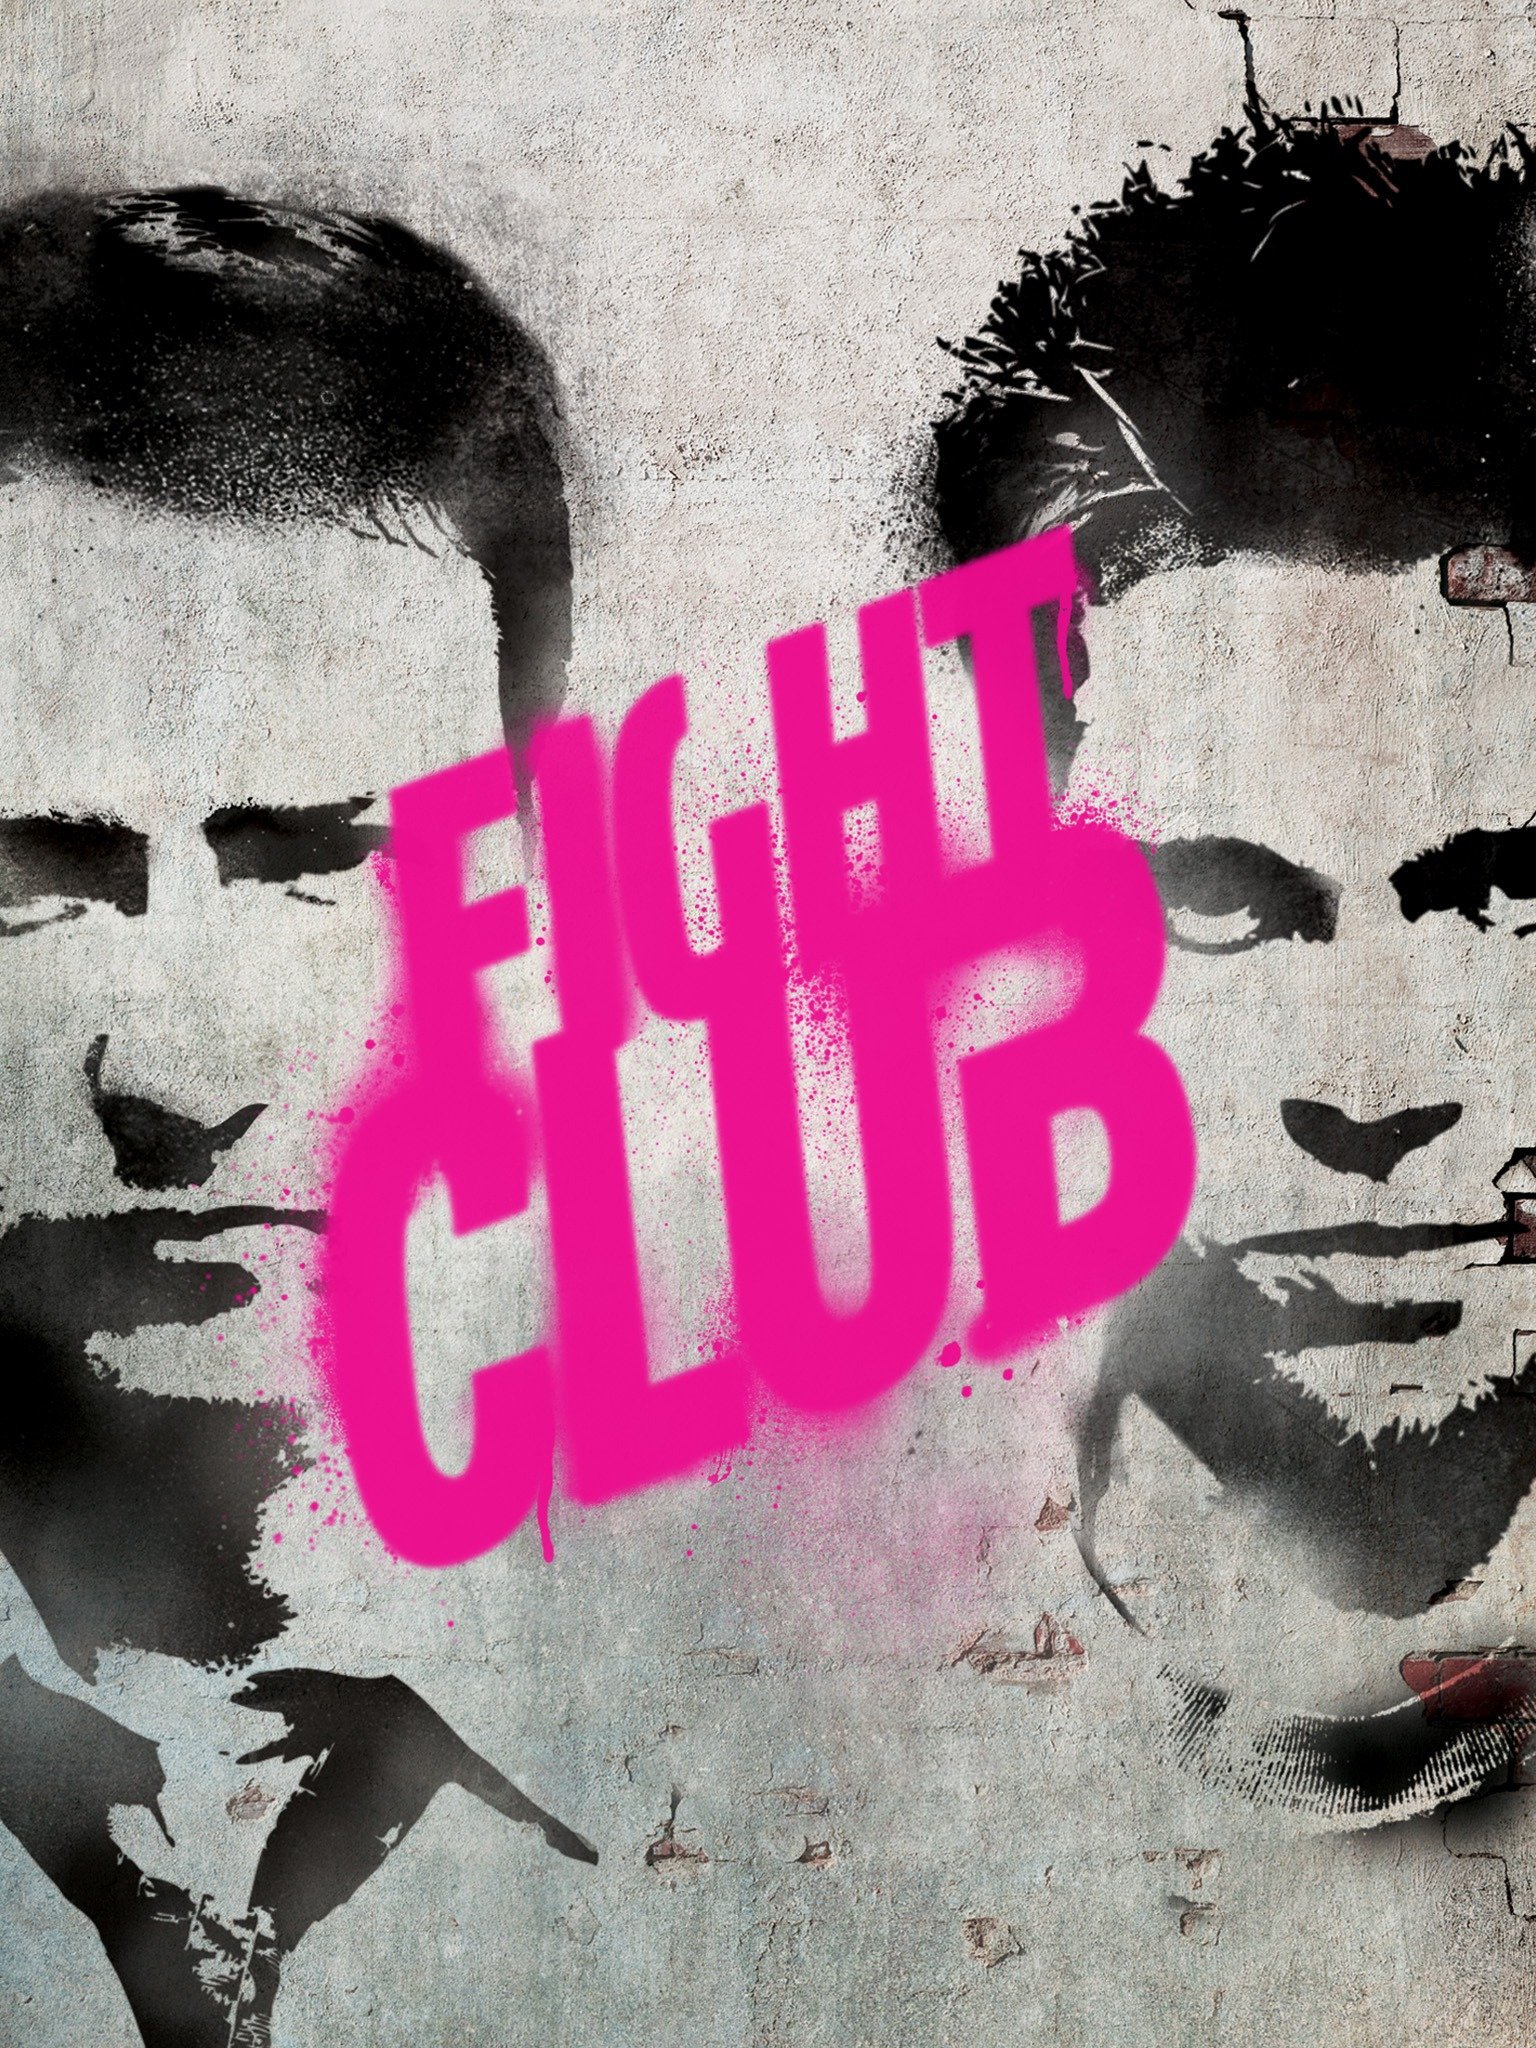 Fight Club: Trailer 1 - Trailers & Videos - Rotten Tomatoes